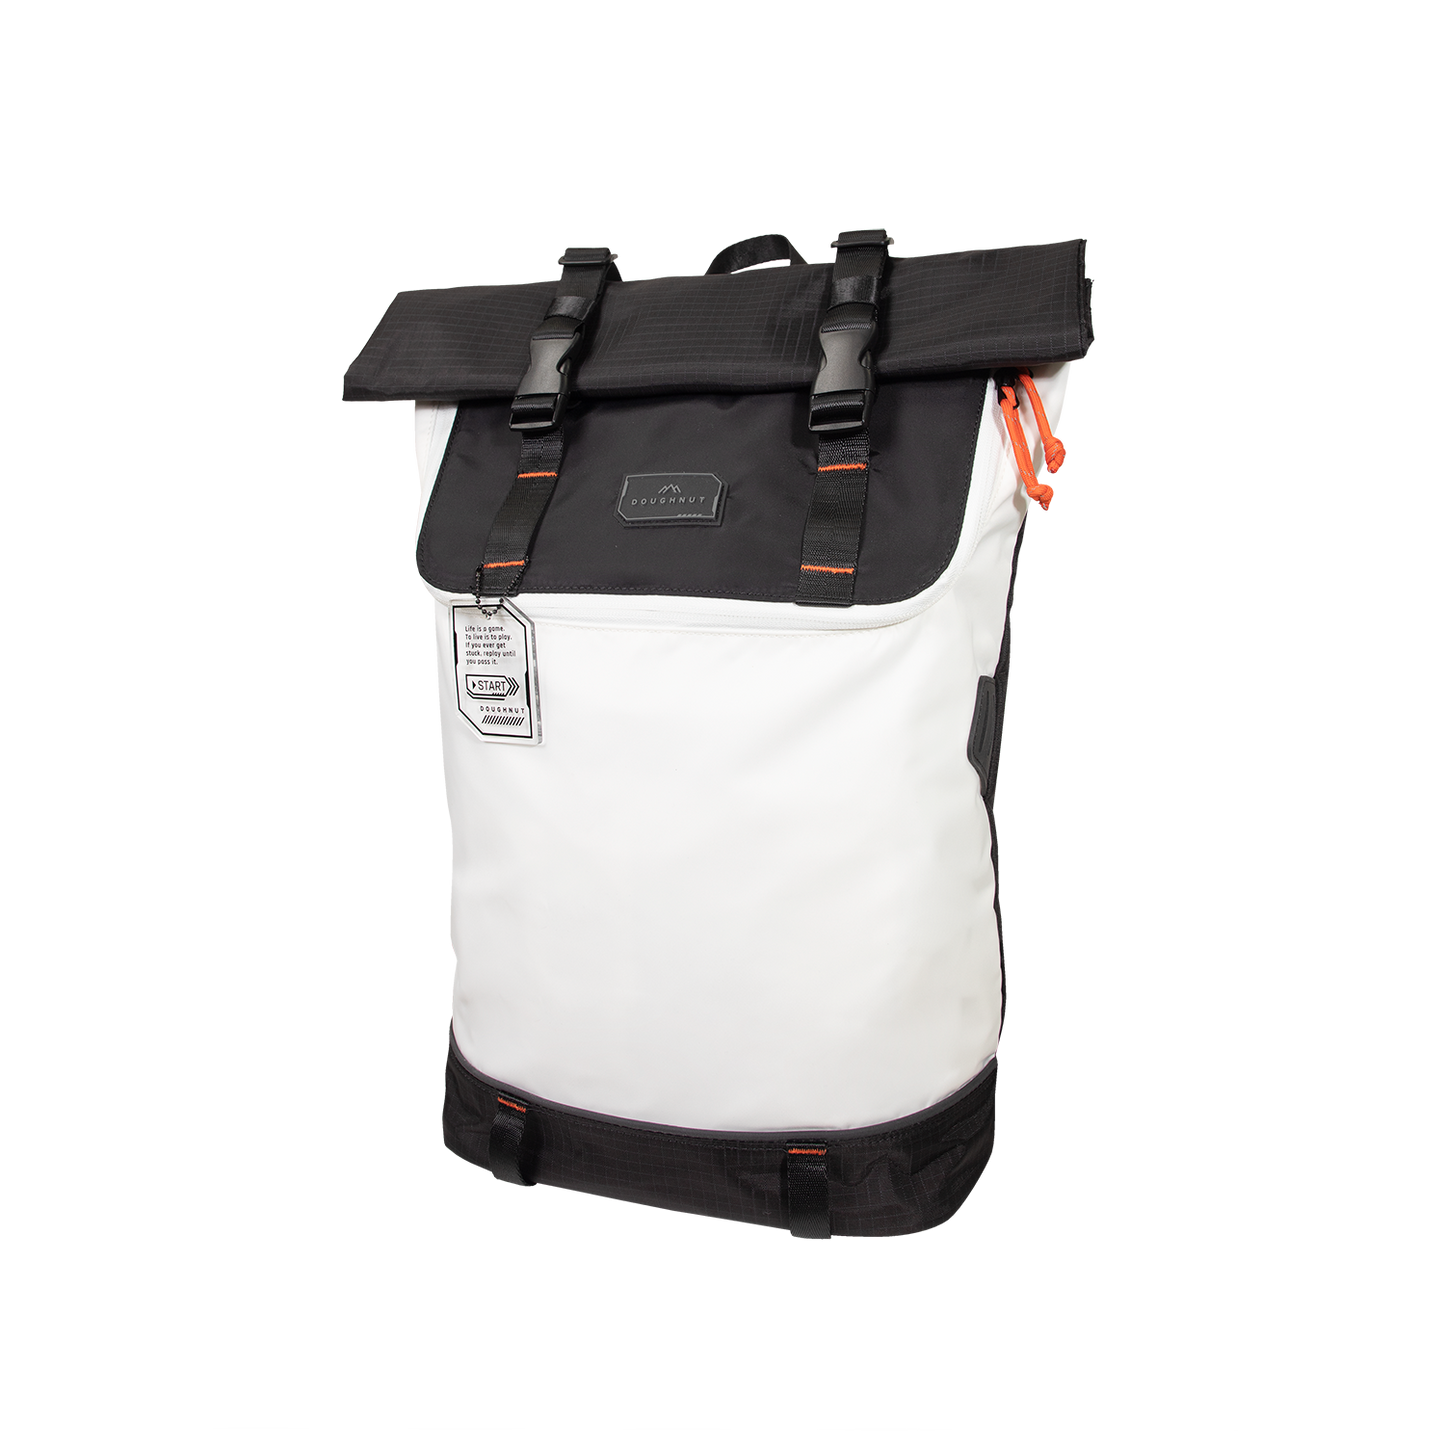 Christopher Gamescape Series Backpack